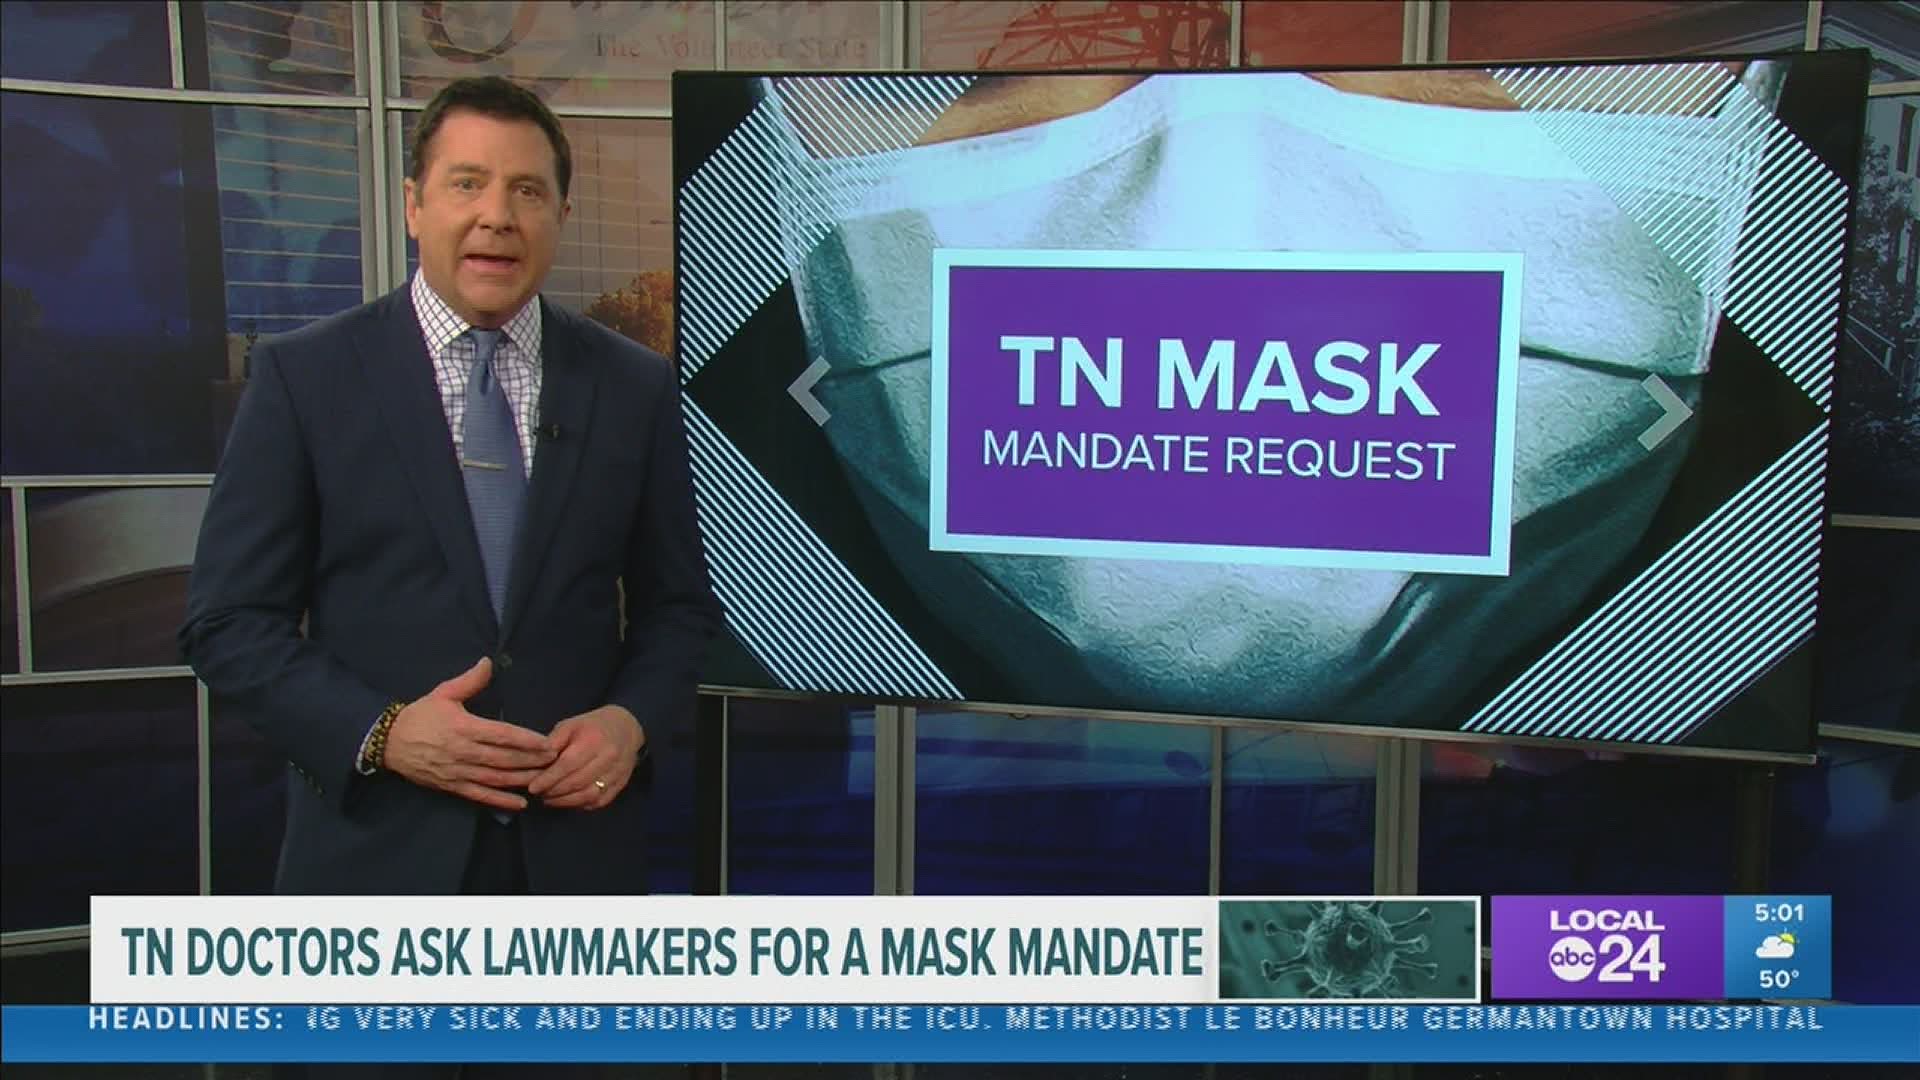 The doctors had been urging Gov. Bill Lee to issue a statewide mask mandate.